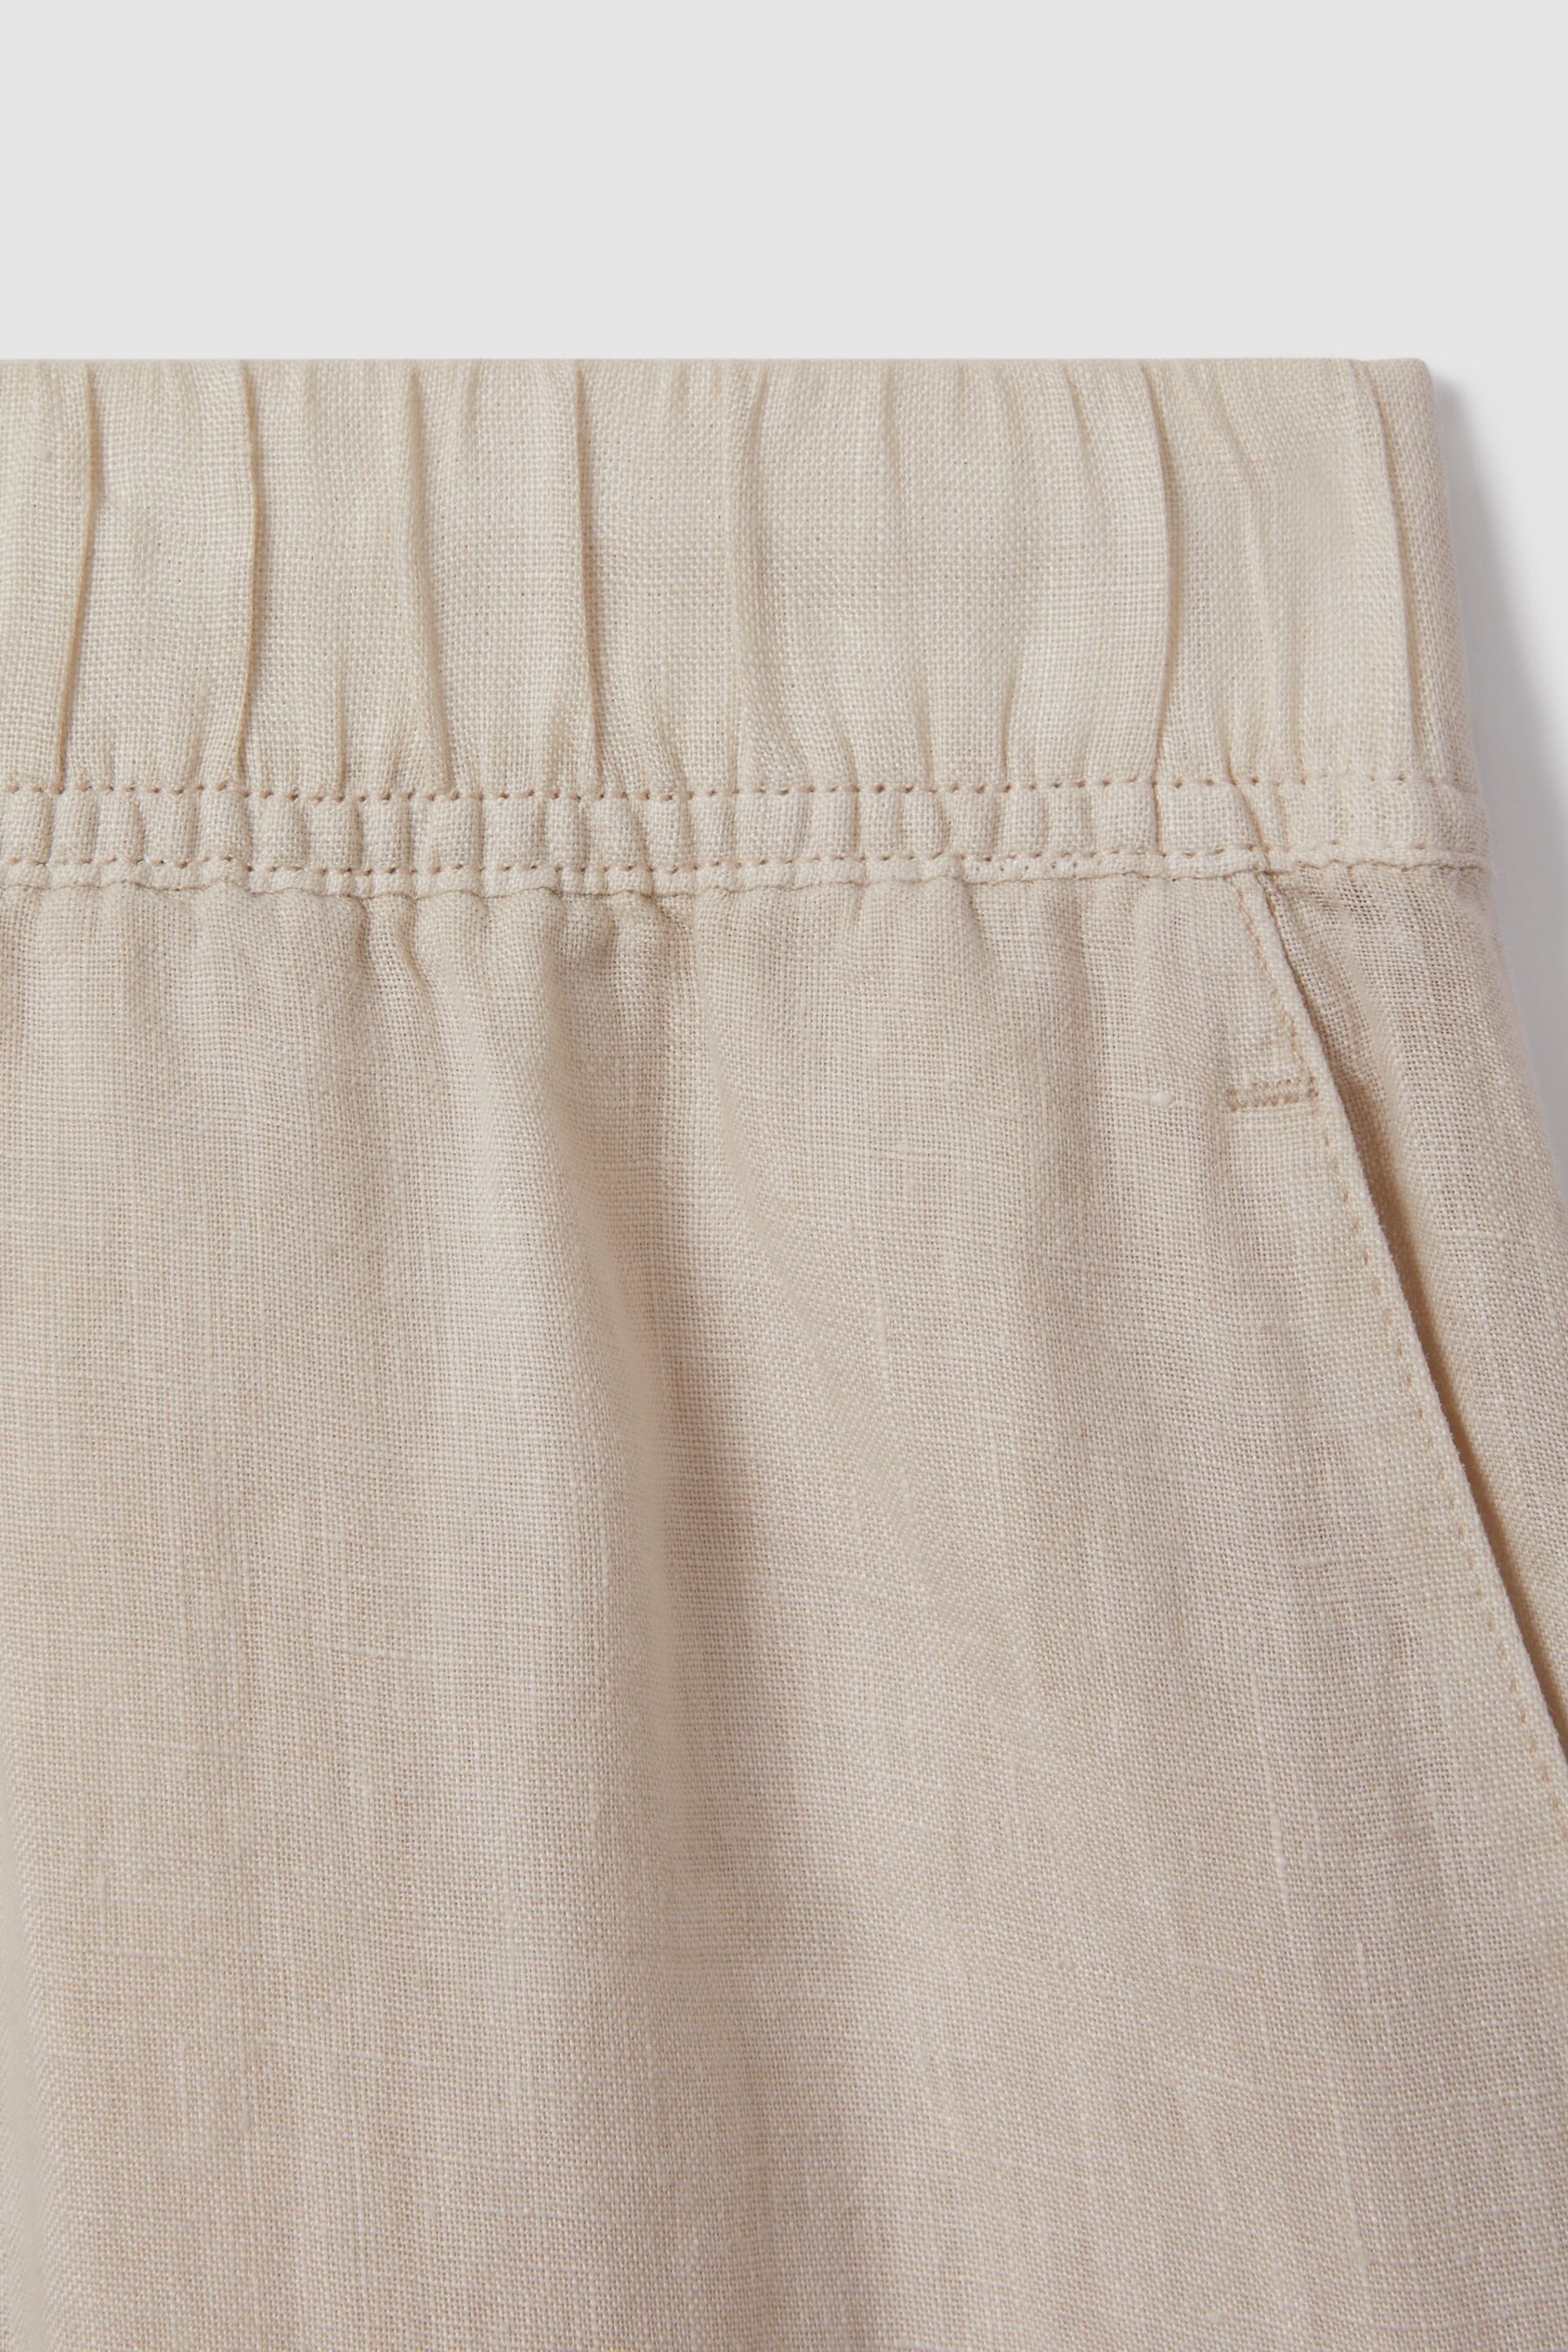 Reiss Oatmeal Cleo Garment Dyed Wide Leg Linen Trousers - Image 6 of 6